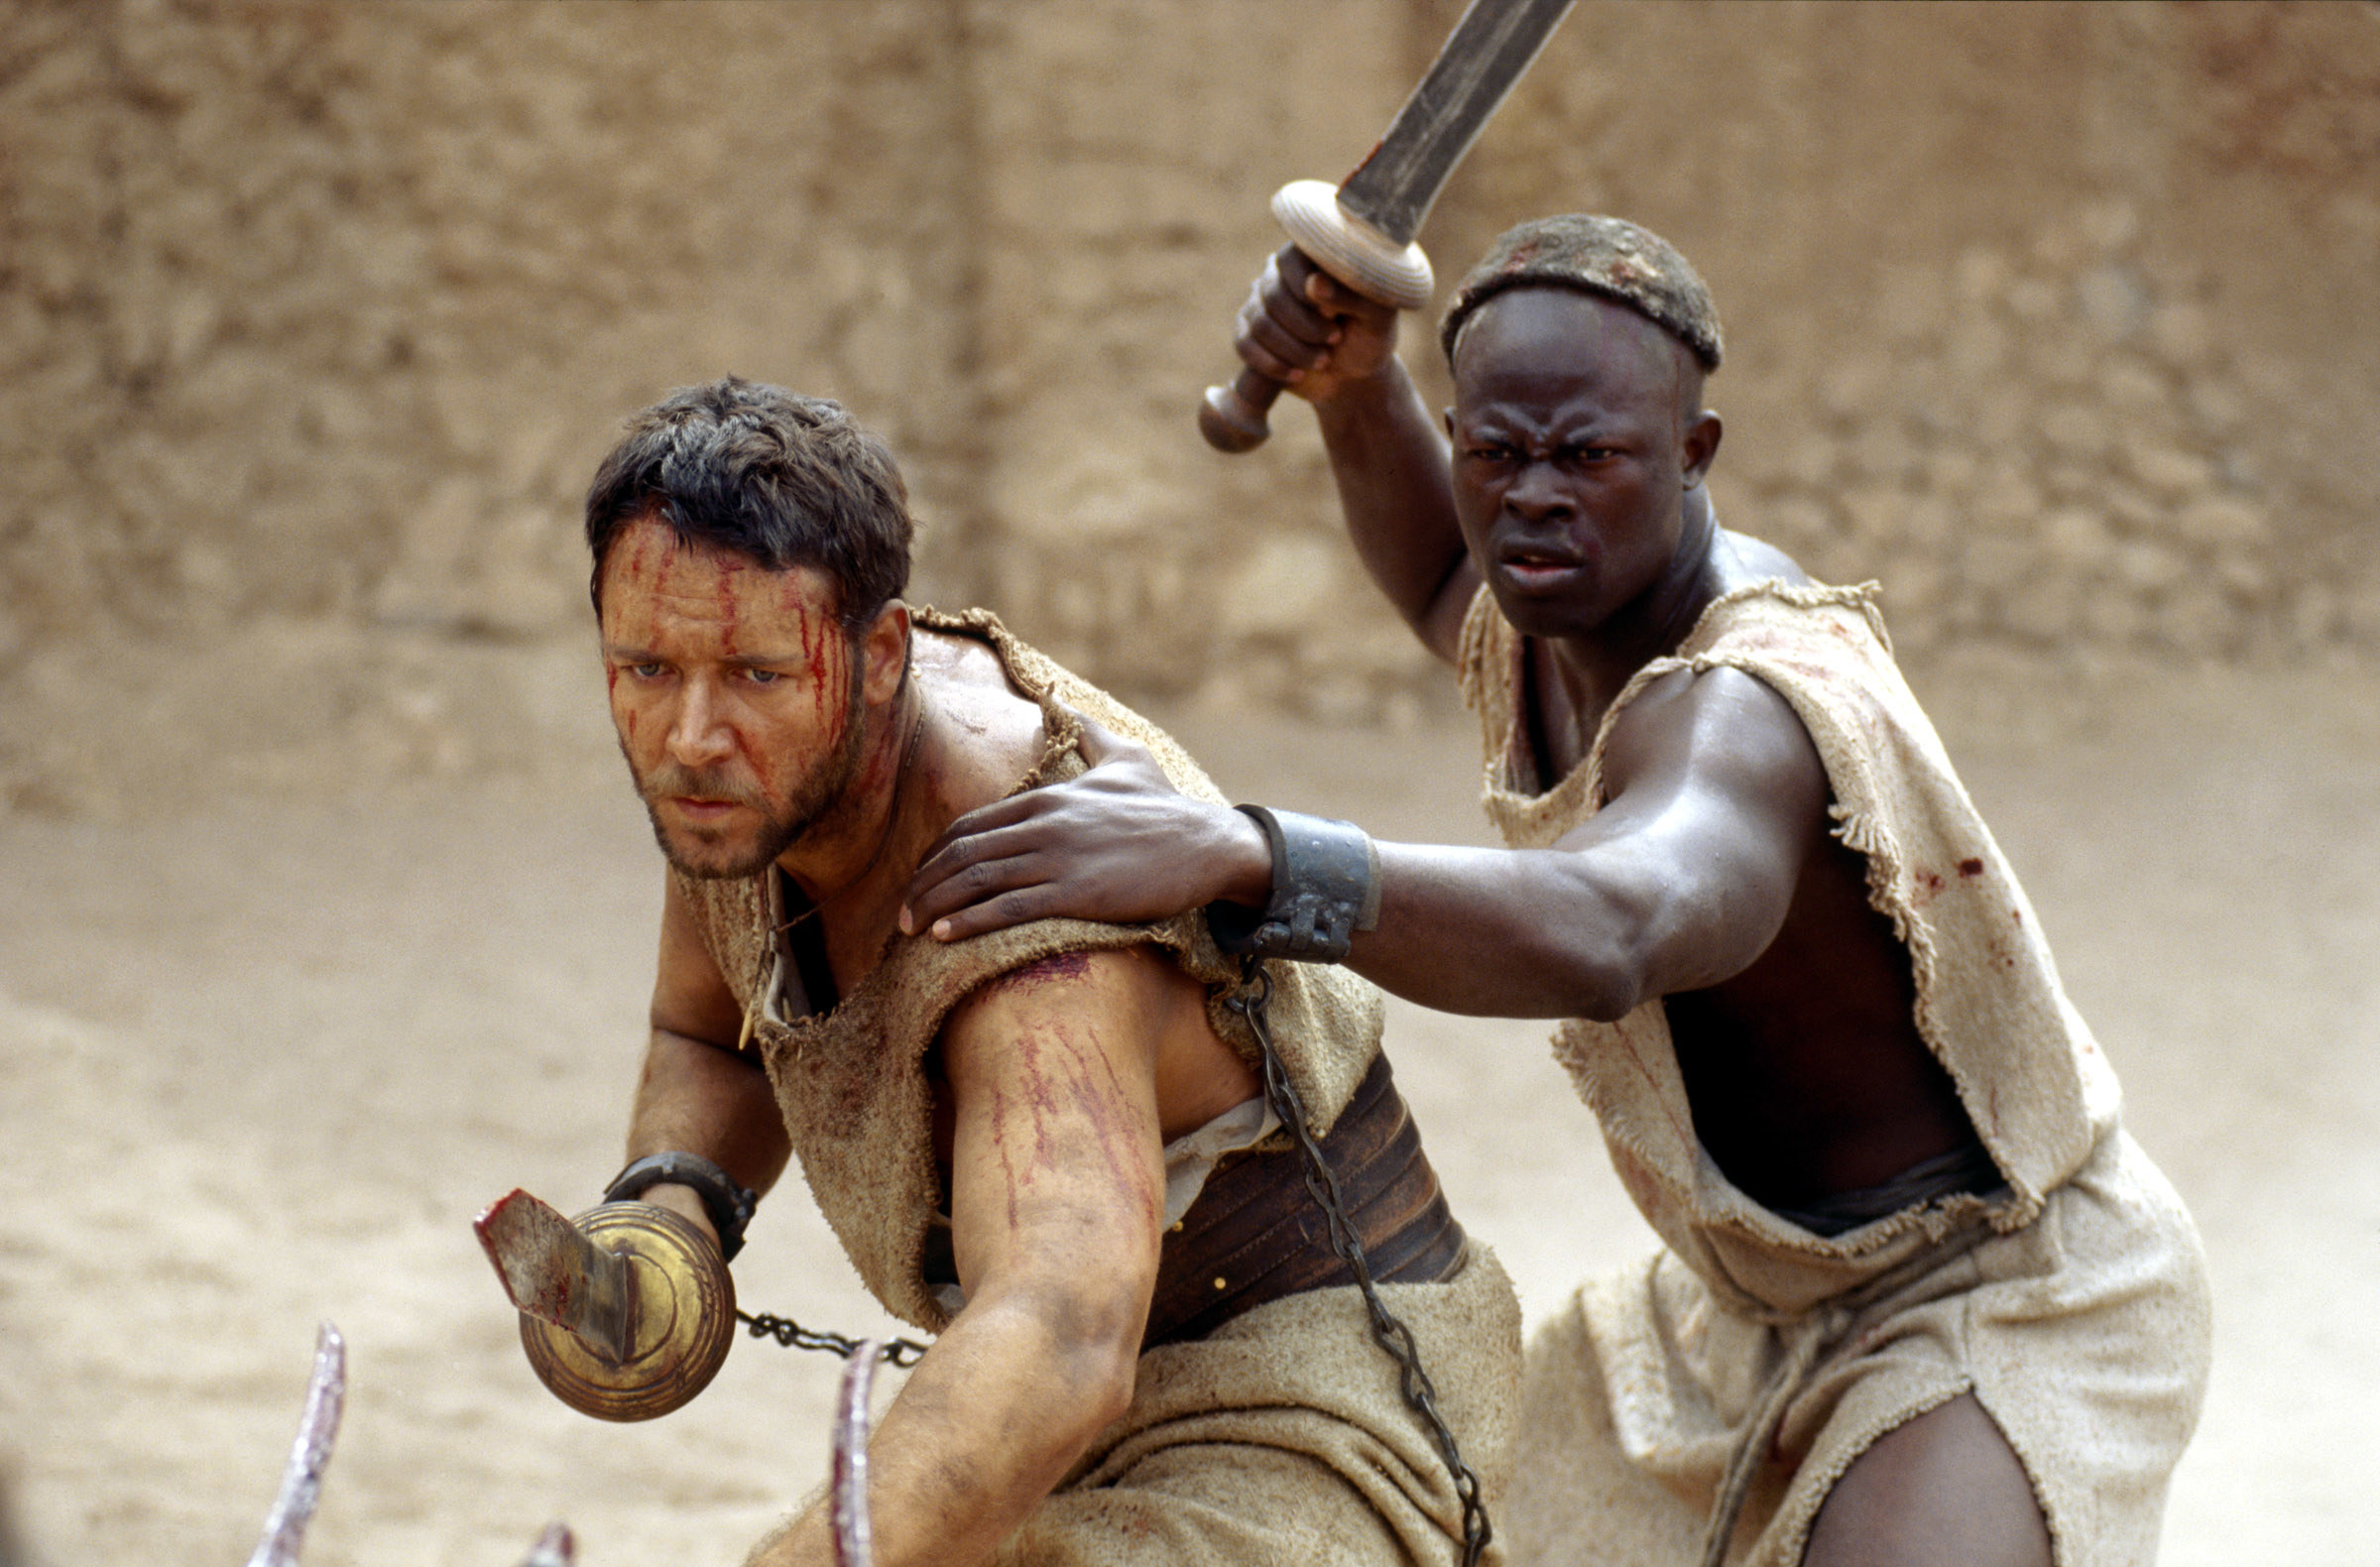 Russell Crowe and Djimon Hounsou in the gladiator ring